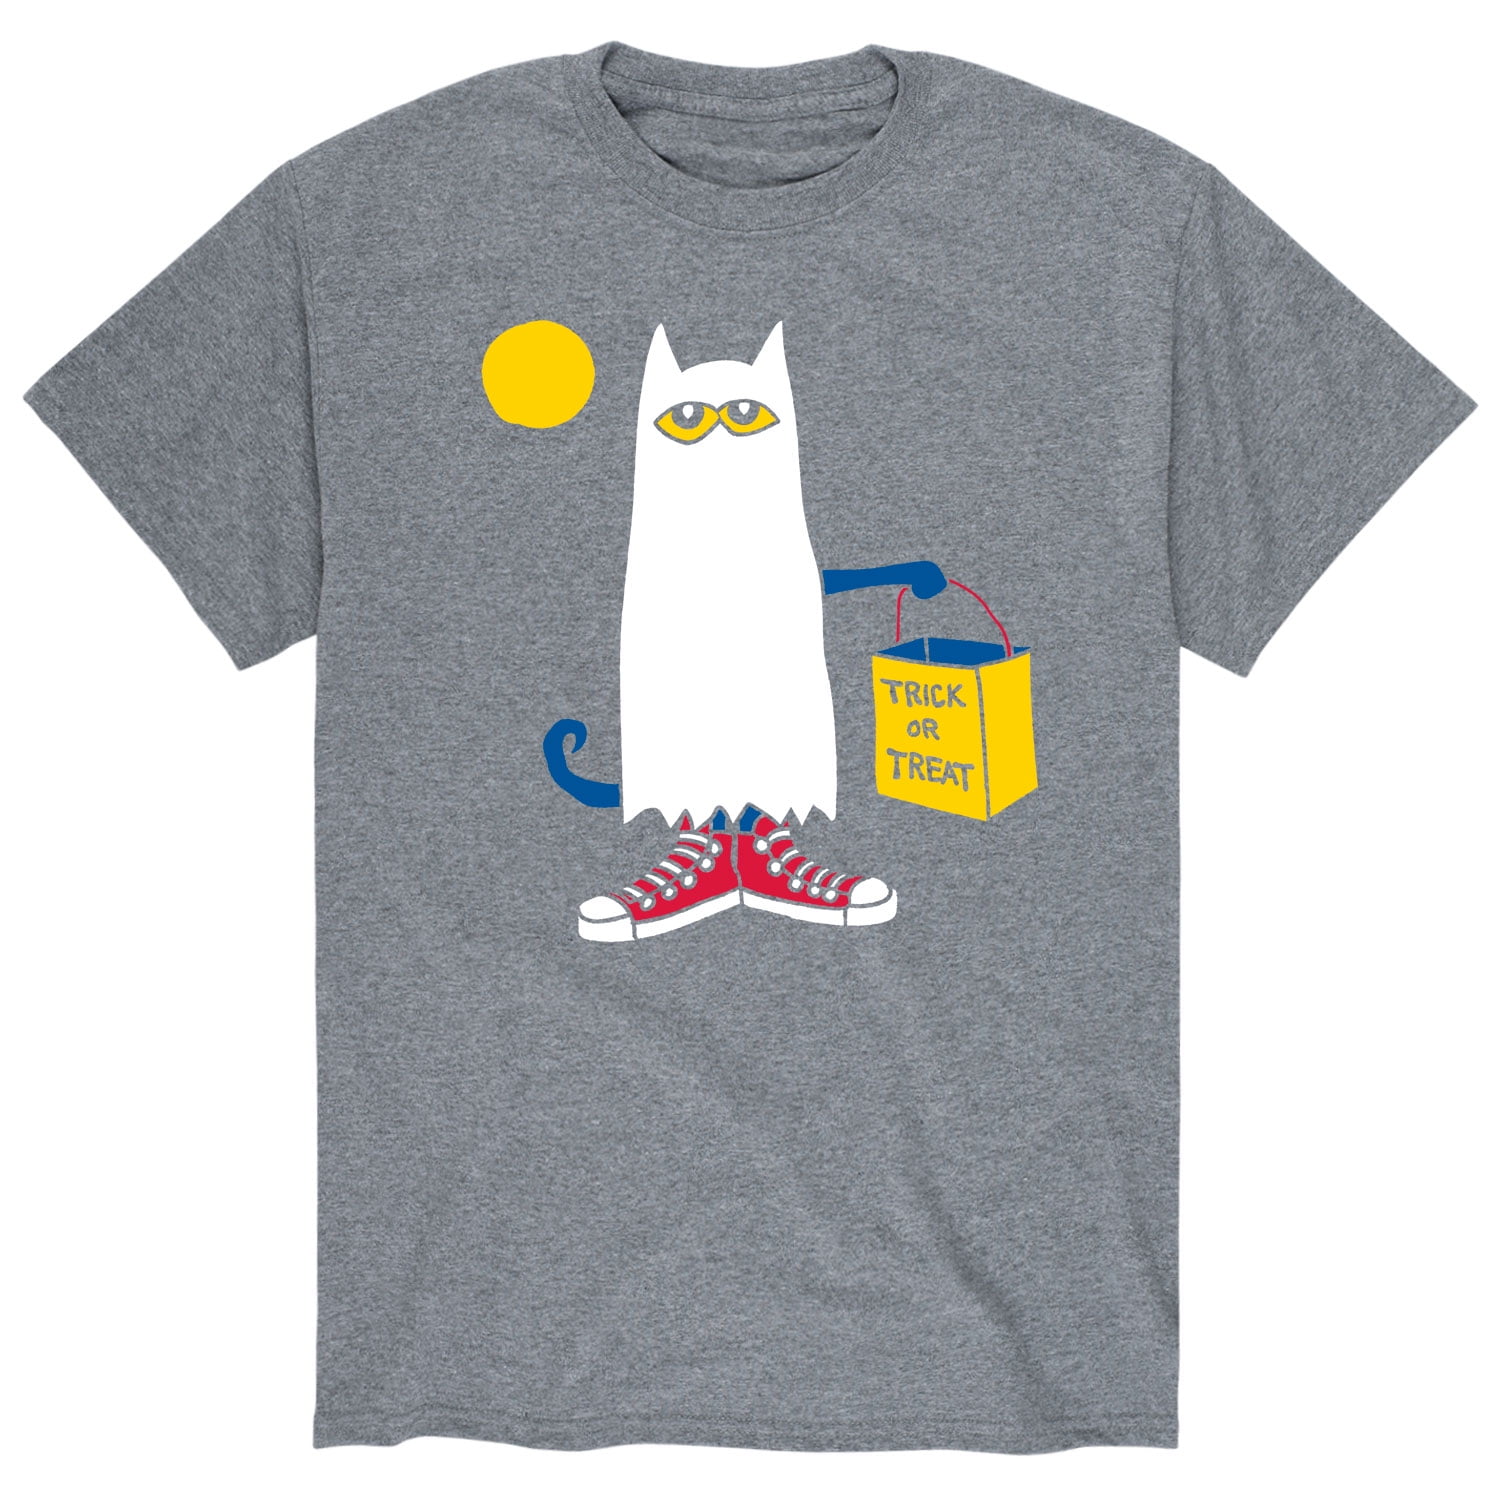 Pete The Cat - Ghost Trick Or Treat Graphic - Men's Short Sleeve ...